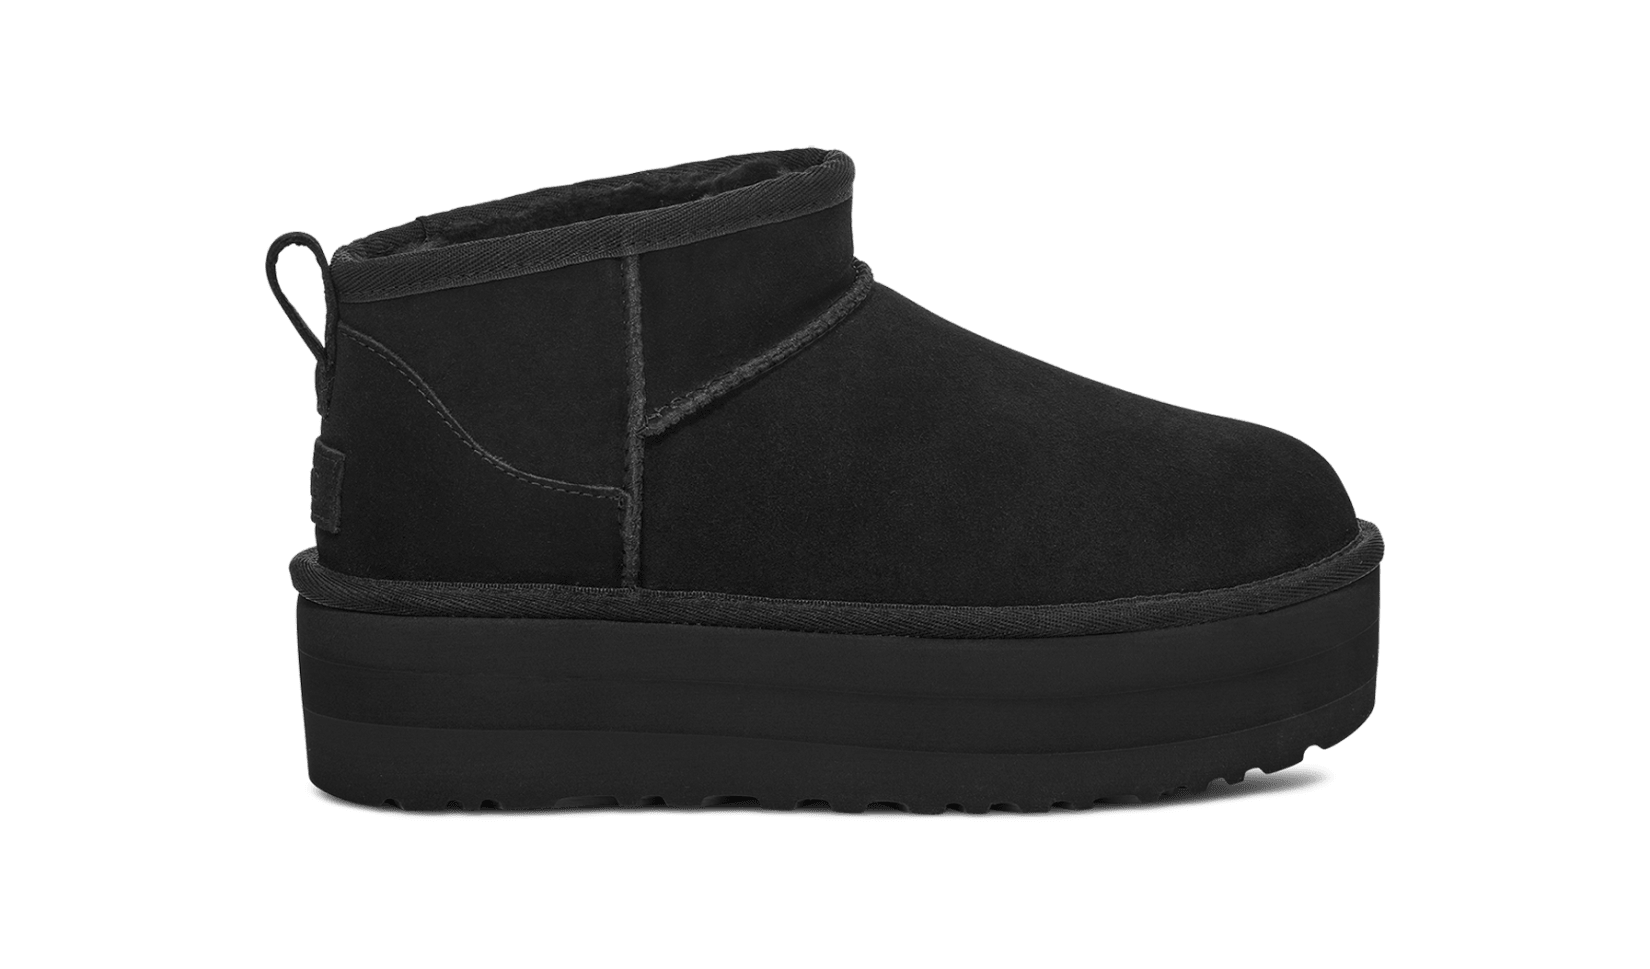 UGG CLASSIC ULTRA MINI LEATHER BOOTs BLACK Women's Girl's Limited Edition